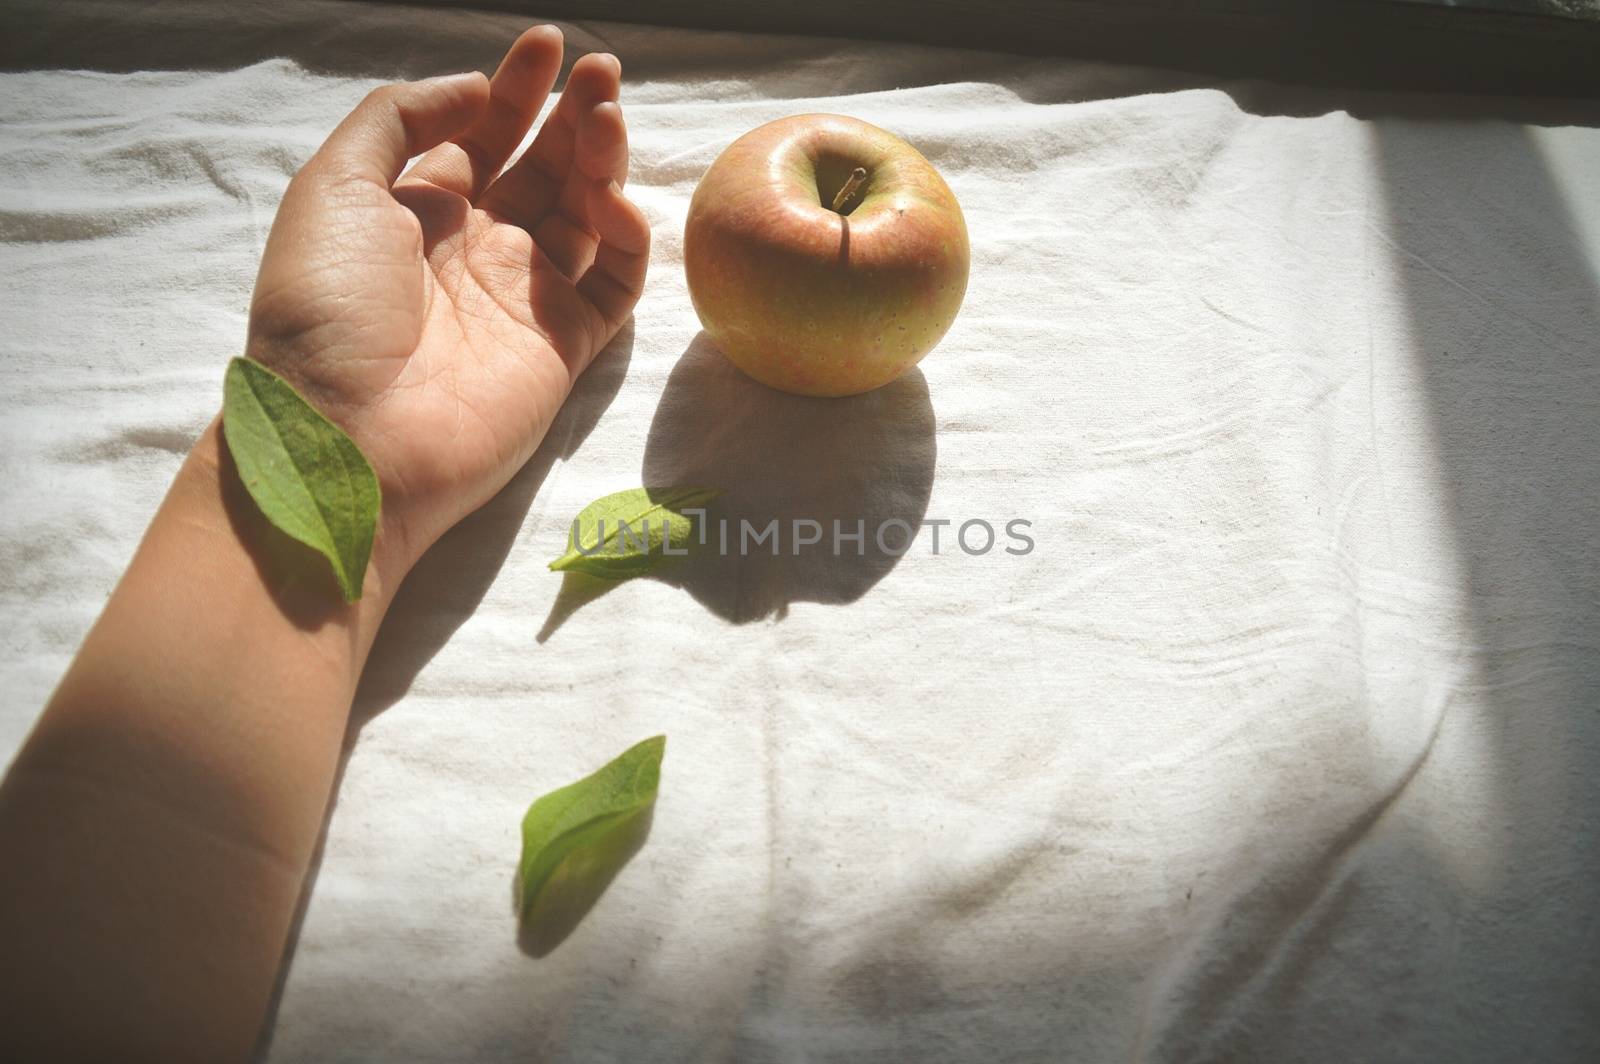 Leaf covering the wrist hand and an apple against a white bed sheet by Sonnet15